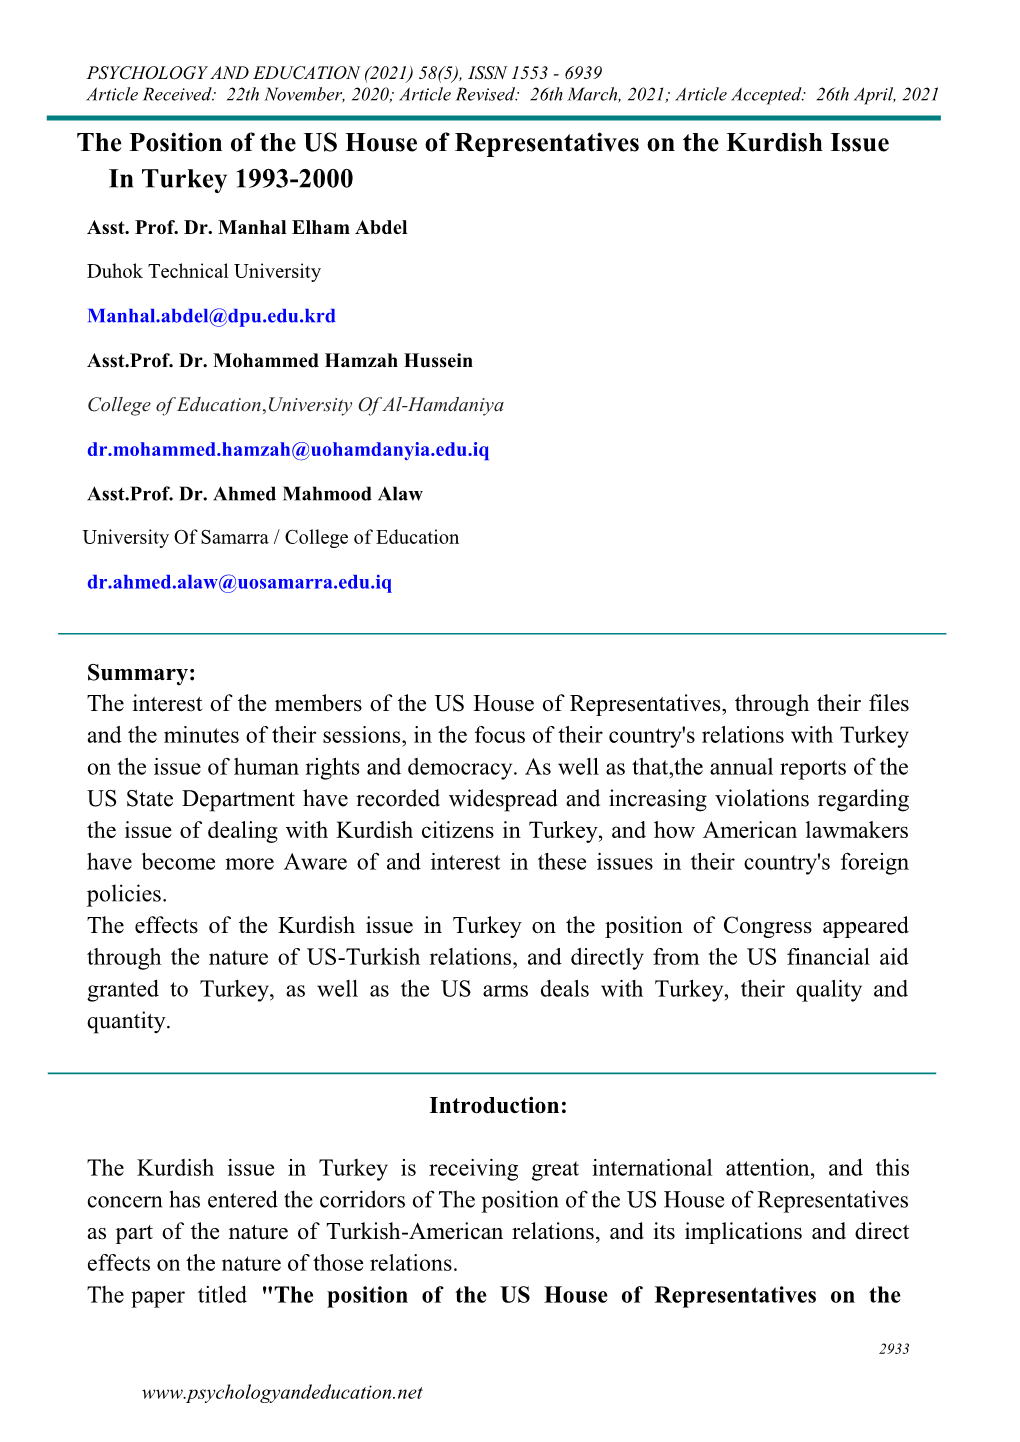 The Position of the US House of Representatives on the Kurdish Issue in Turkey 1993-2000